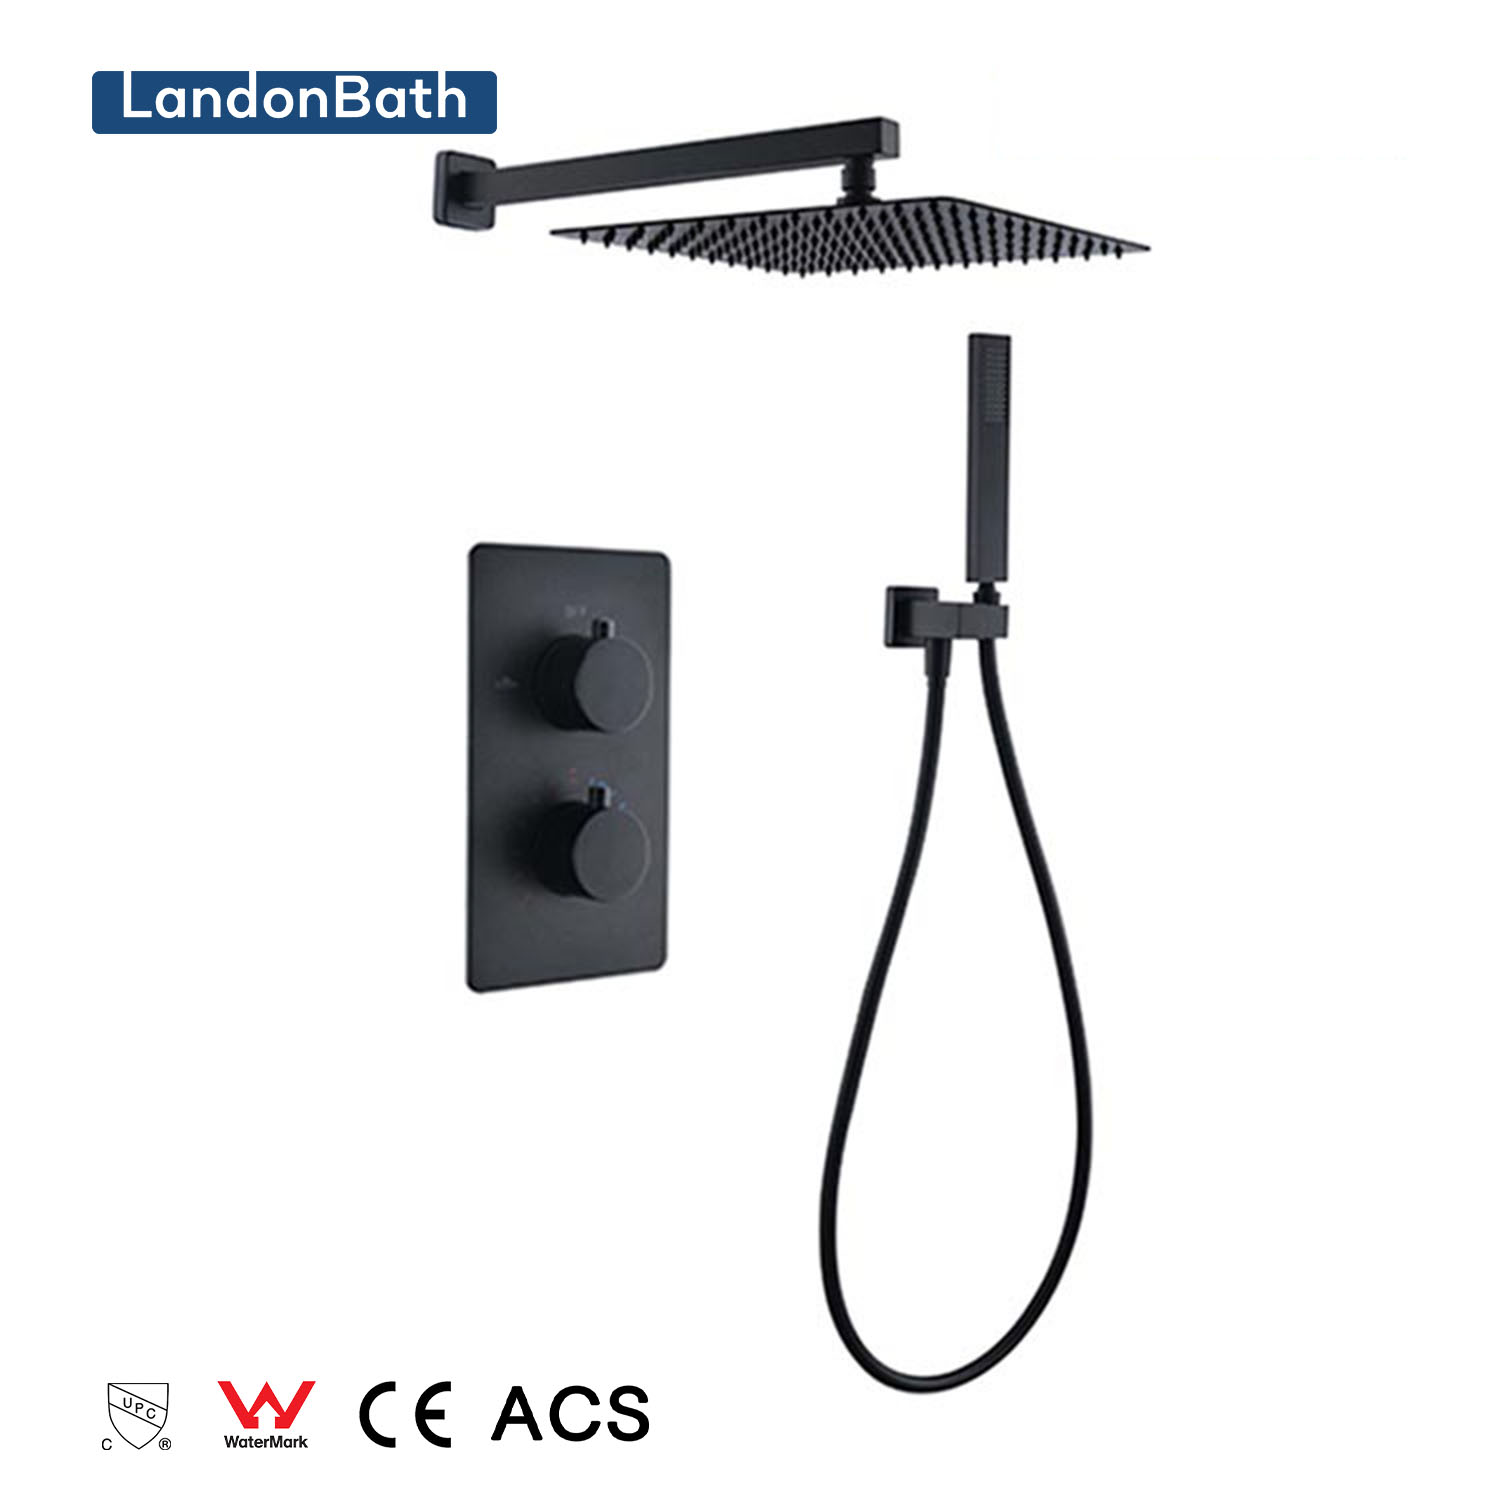 Ceiling Mount Shower System Bathroom Luxury Rain Mixer Shower Set Rainfall Shower Head with Handheld Contemporary Square Black